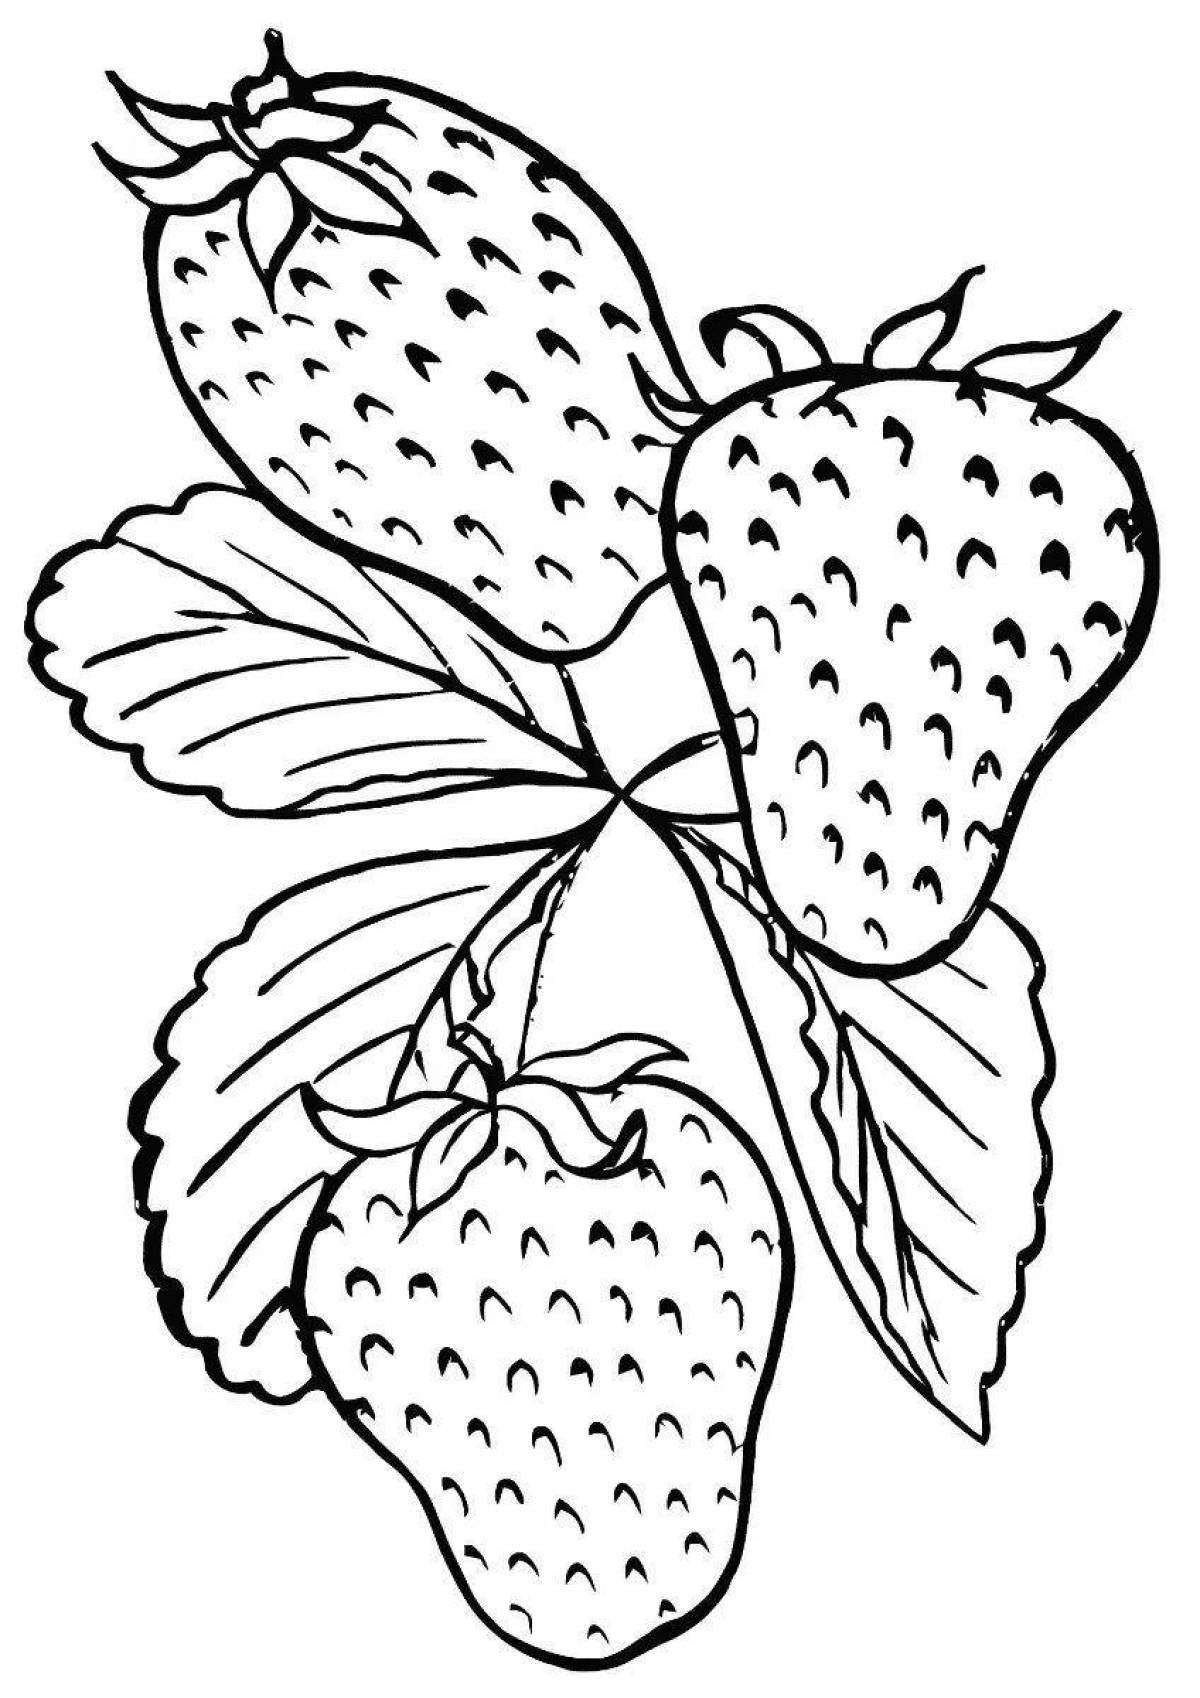 Fabulous strawberry coloring book for kids